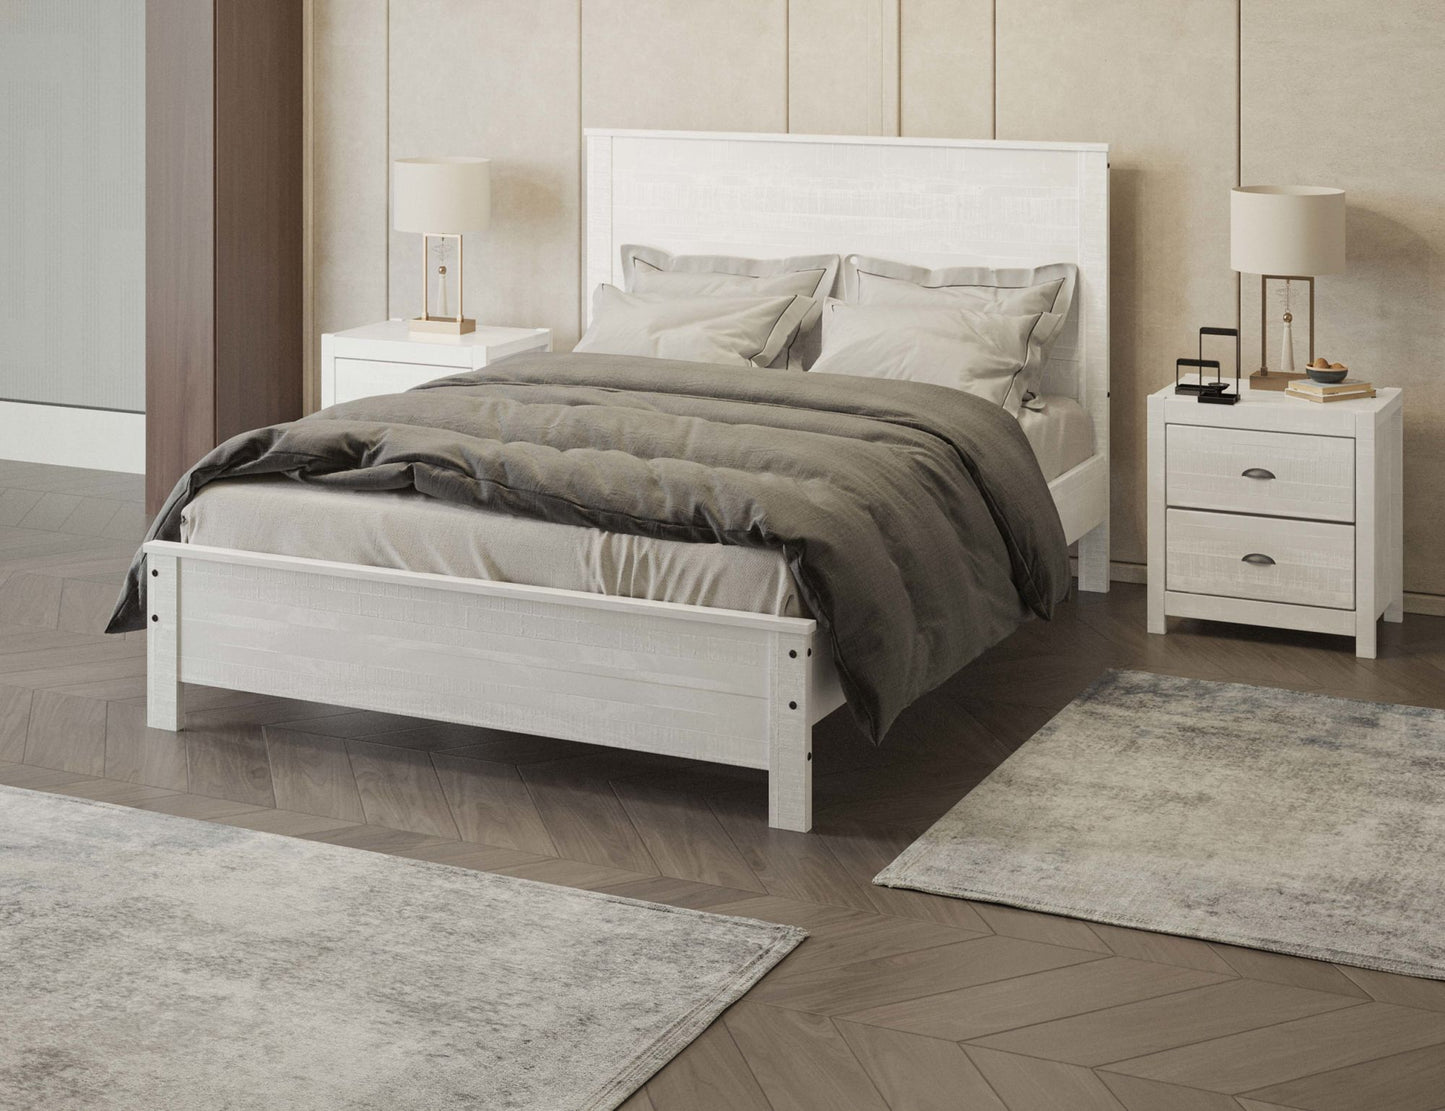 albany 3 piece queen bed set, white